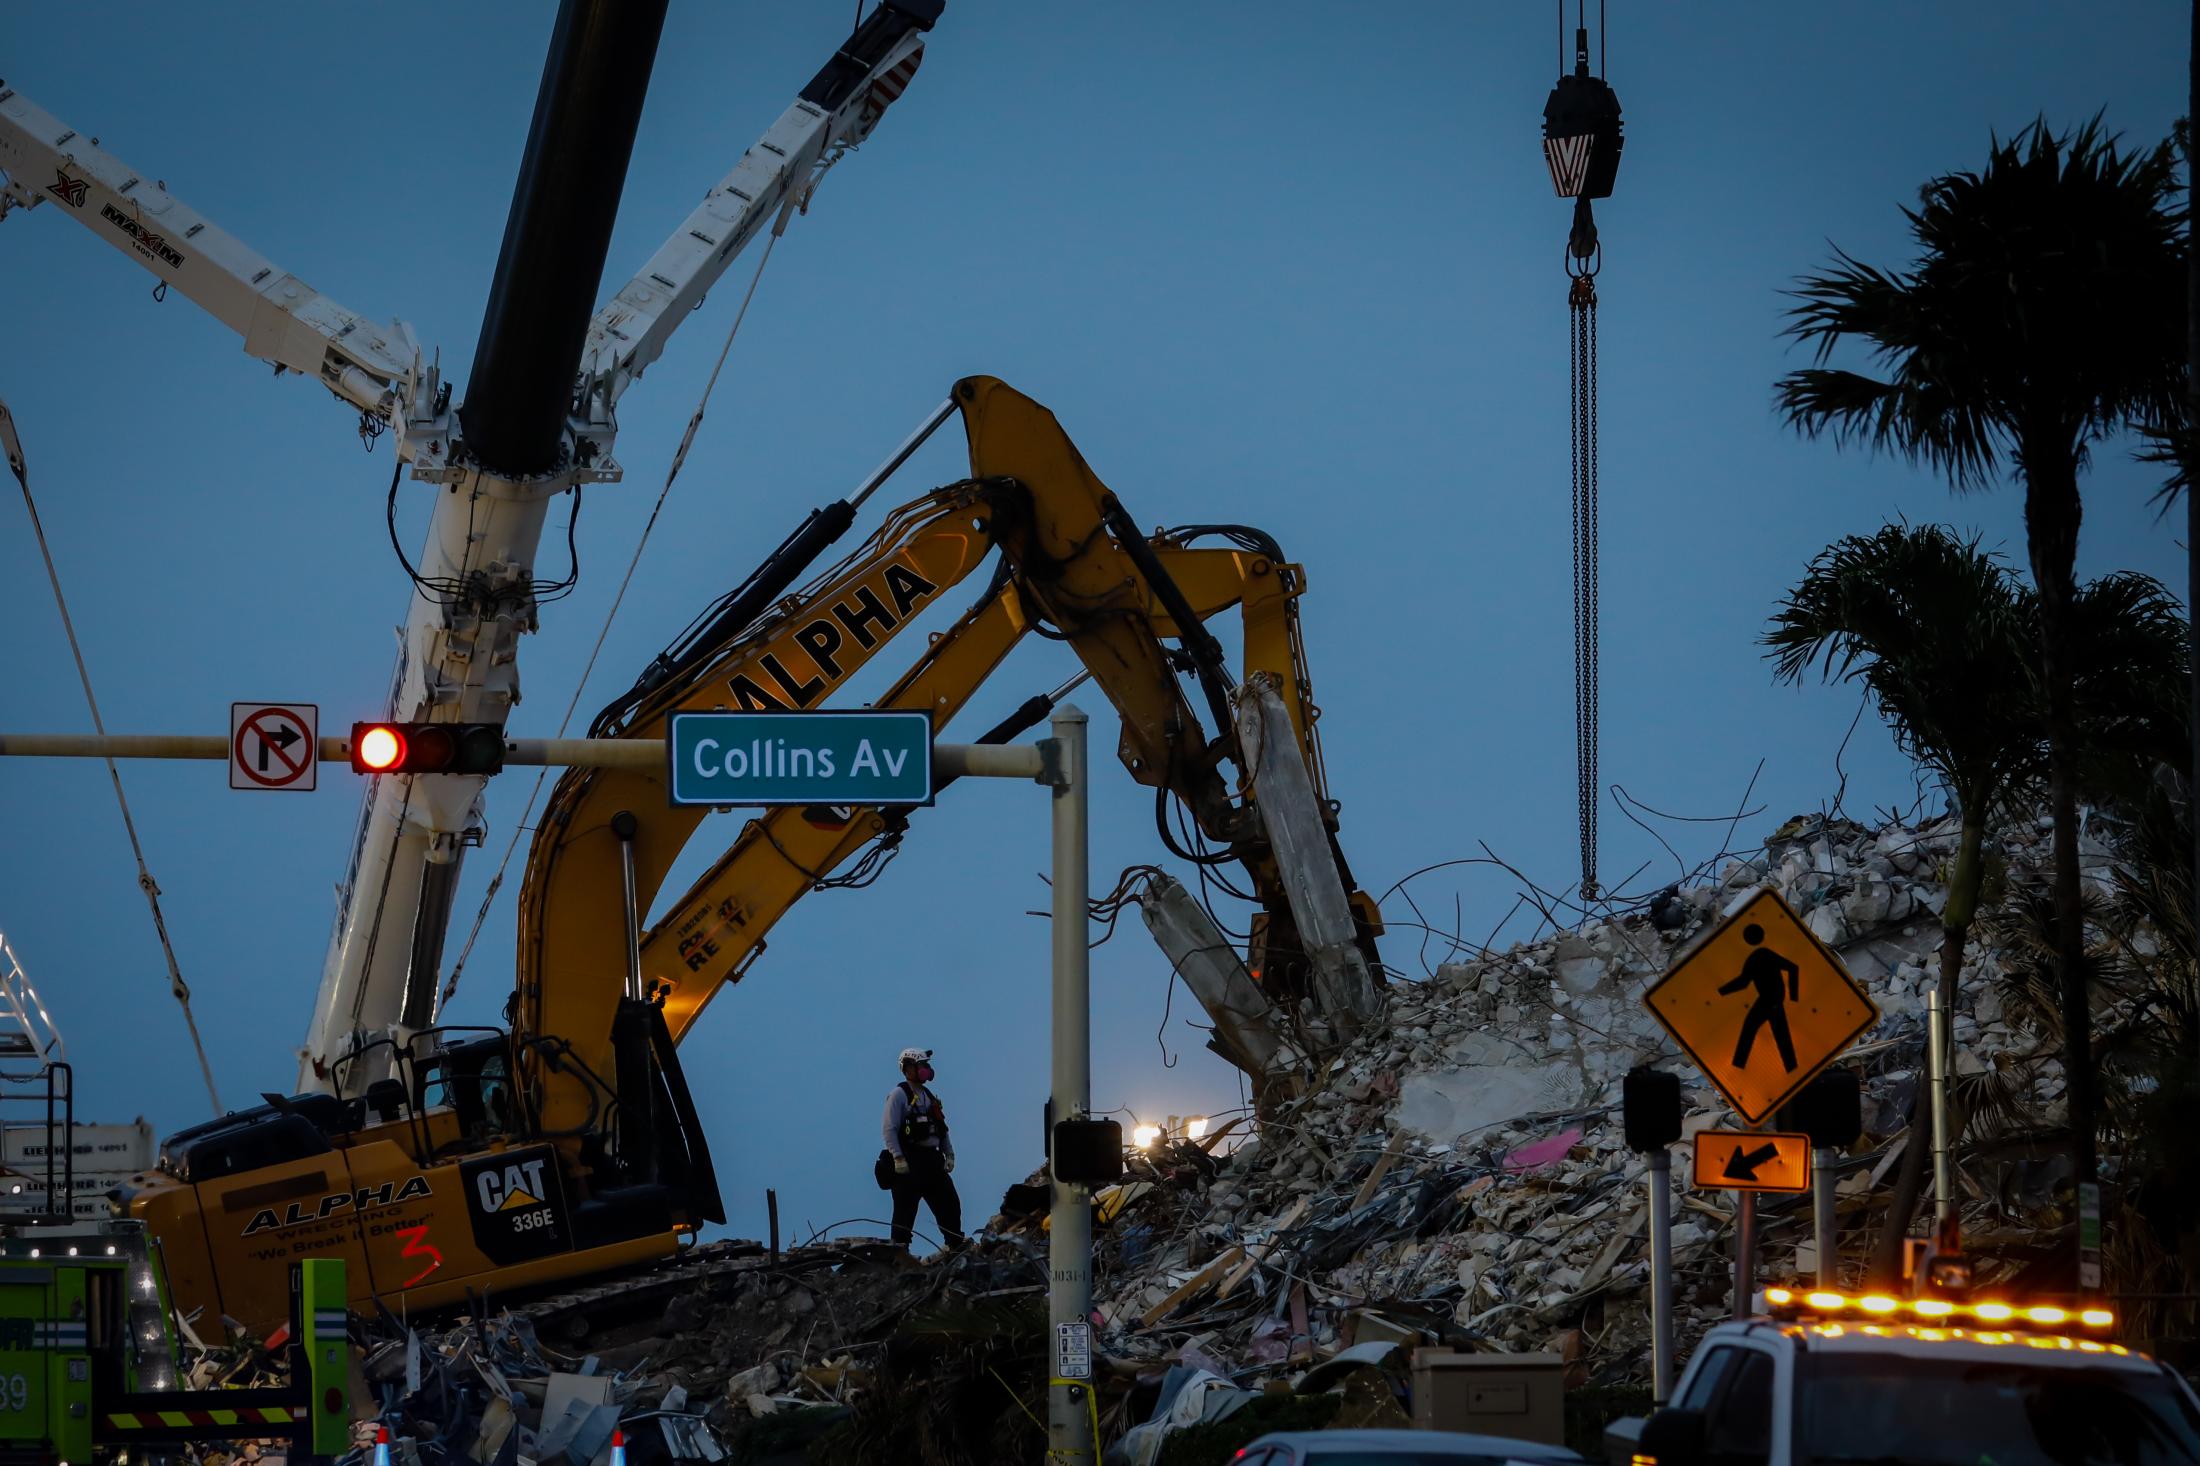 Surfside building collapsed - Search and rescue personnel continue to work on the...